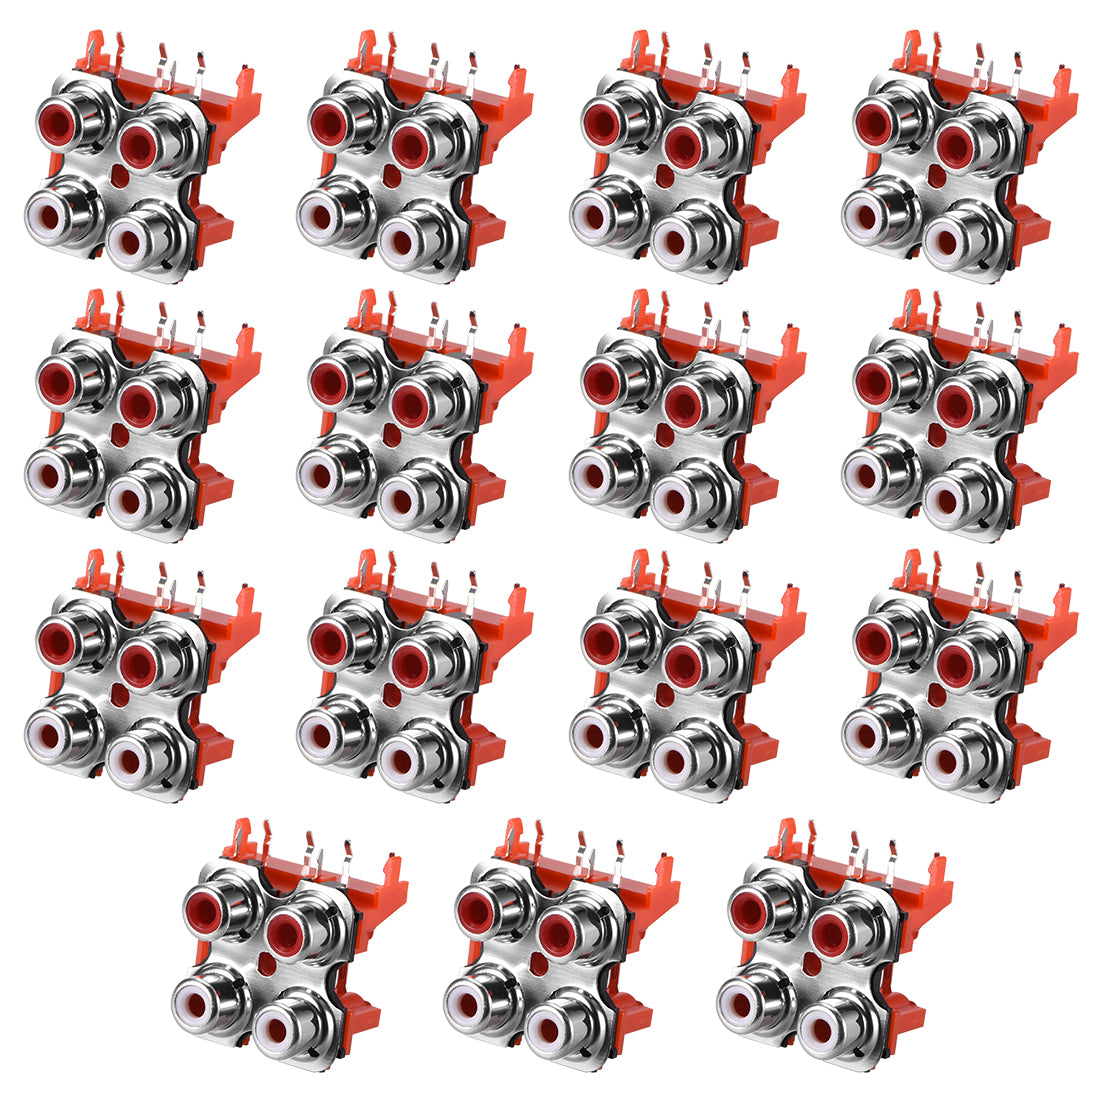 uxcell Uxcell PCB Panel Mount 4 RCA Socket Female Jack Audio Video AV Connector Red 15Pcs